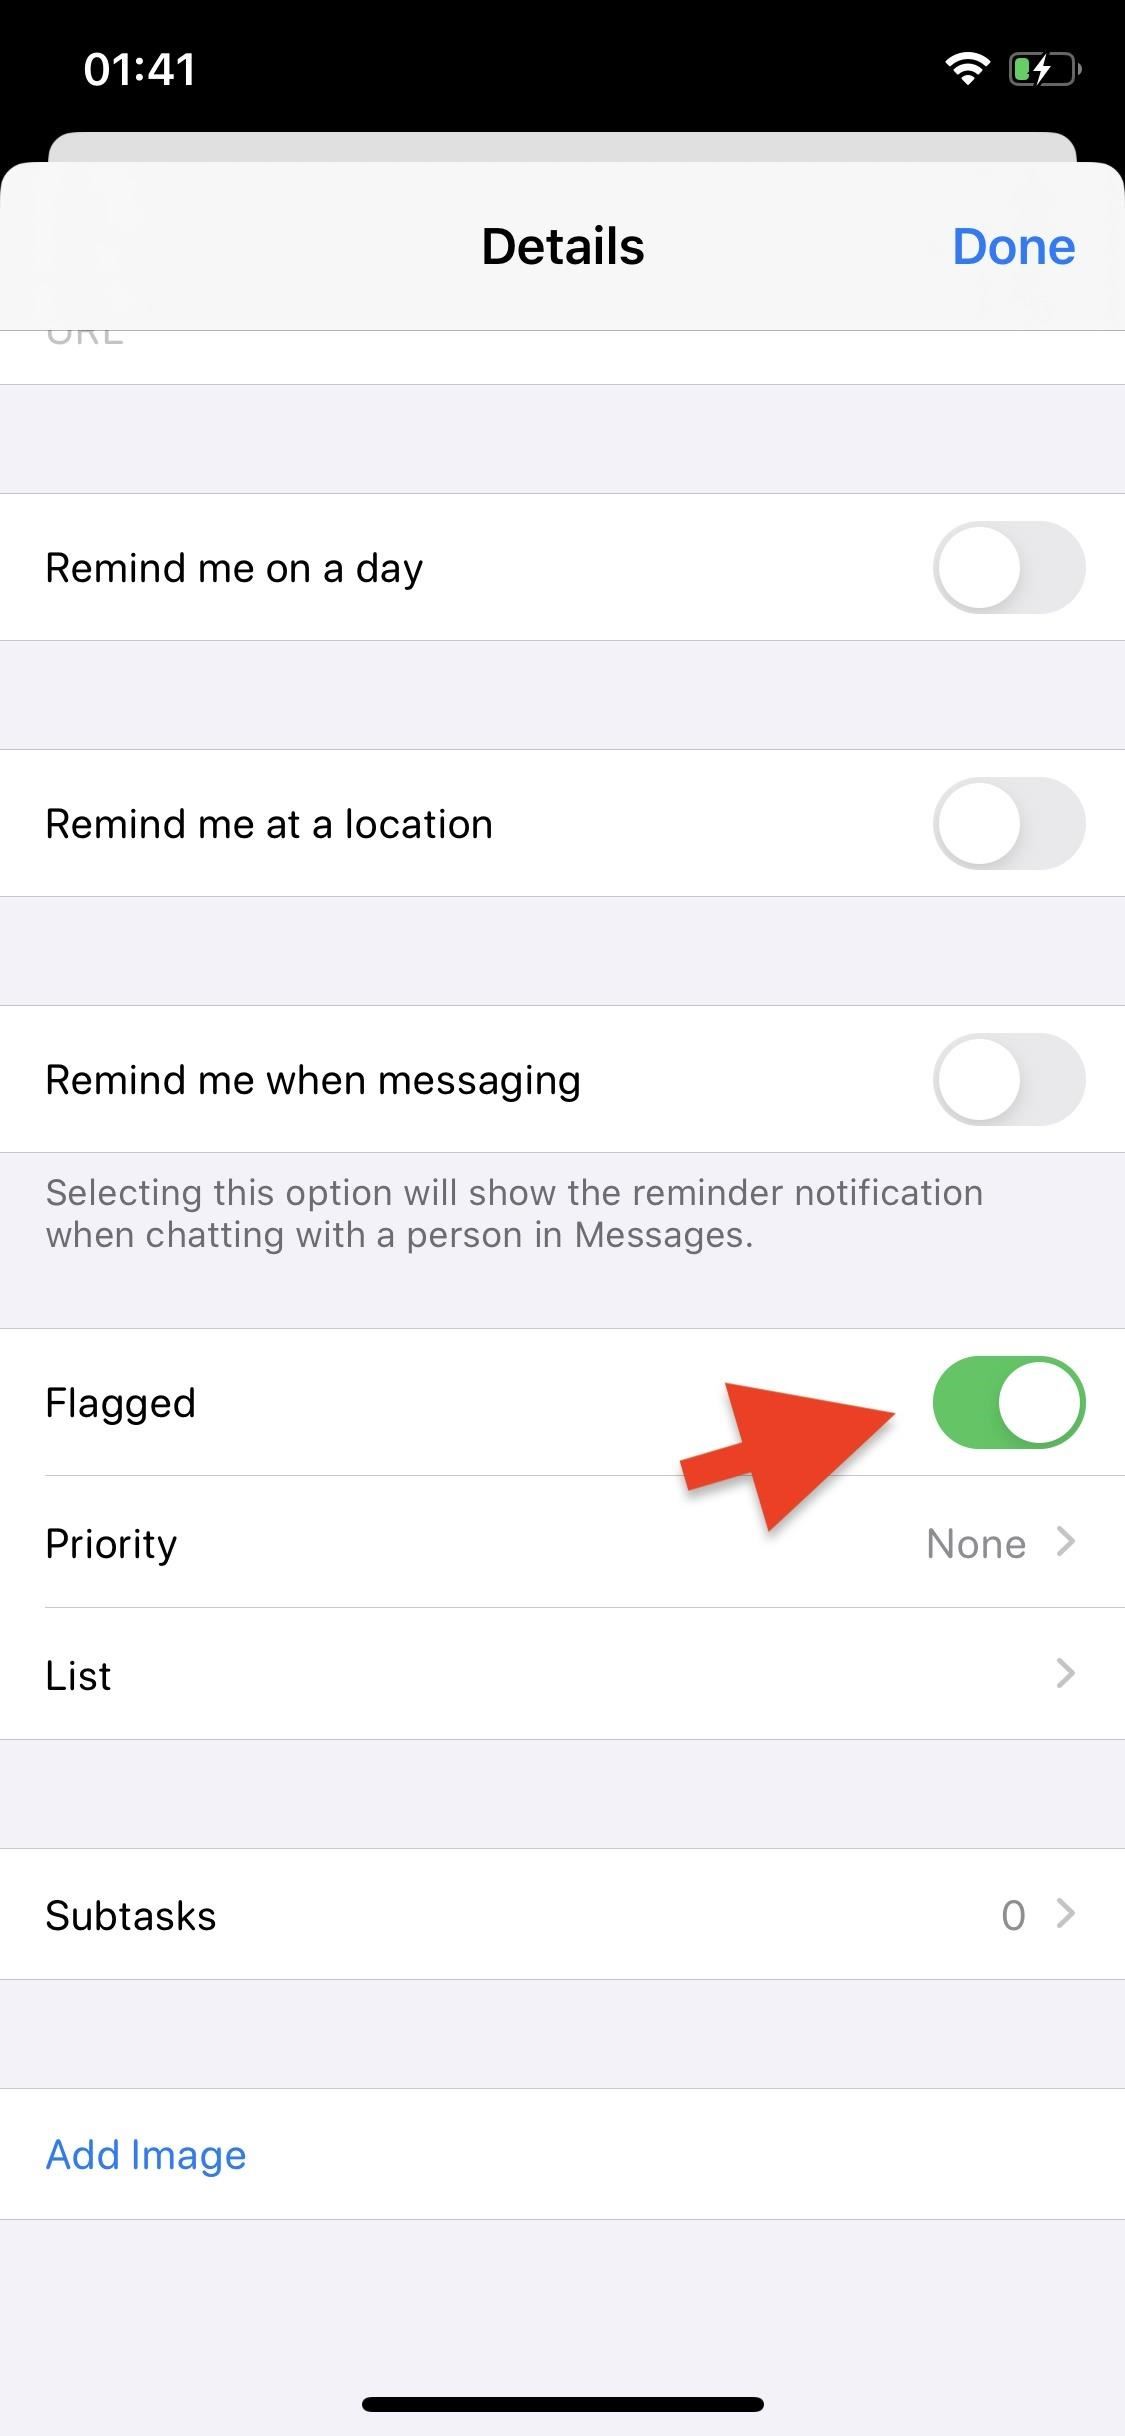 How to Flag Important Reminders in iOS 13 to Make Them Easier to Find